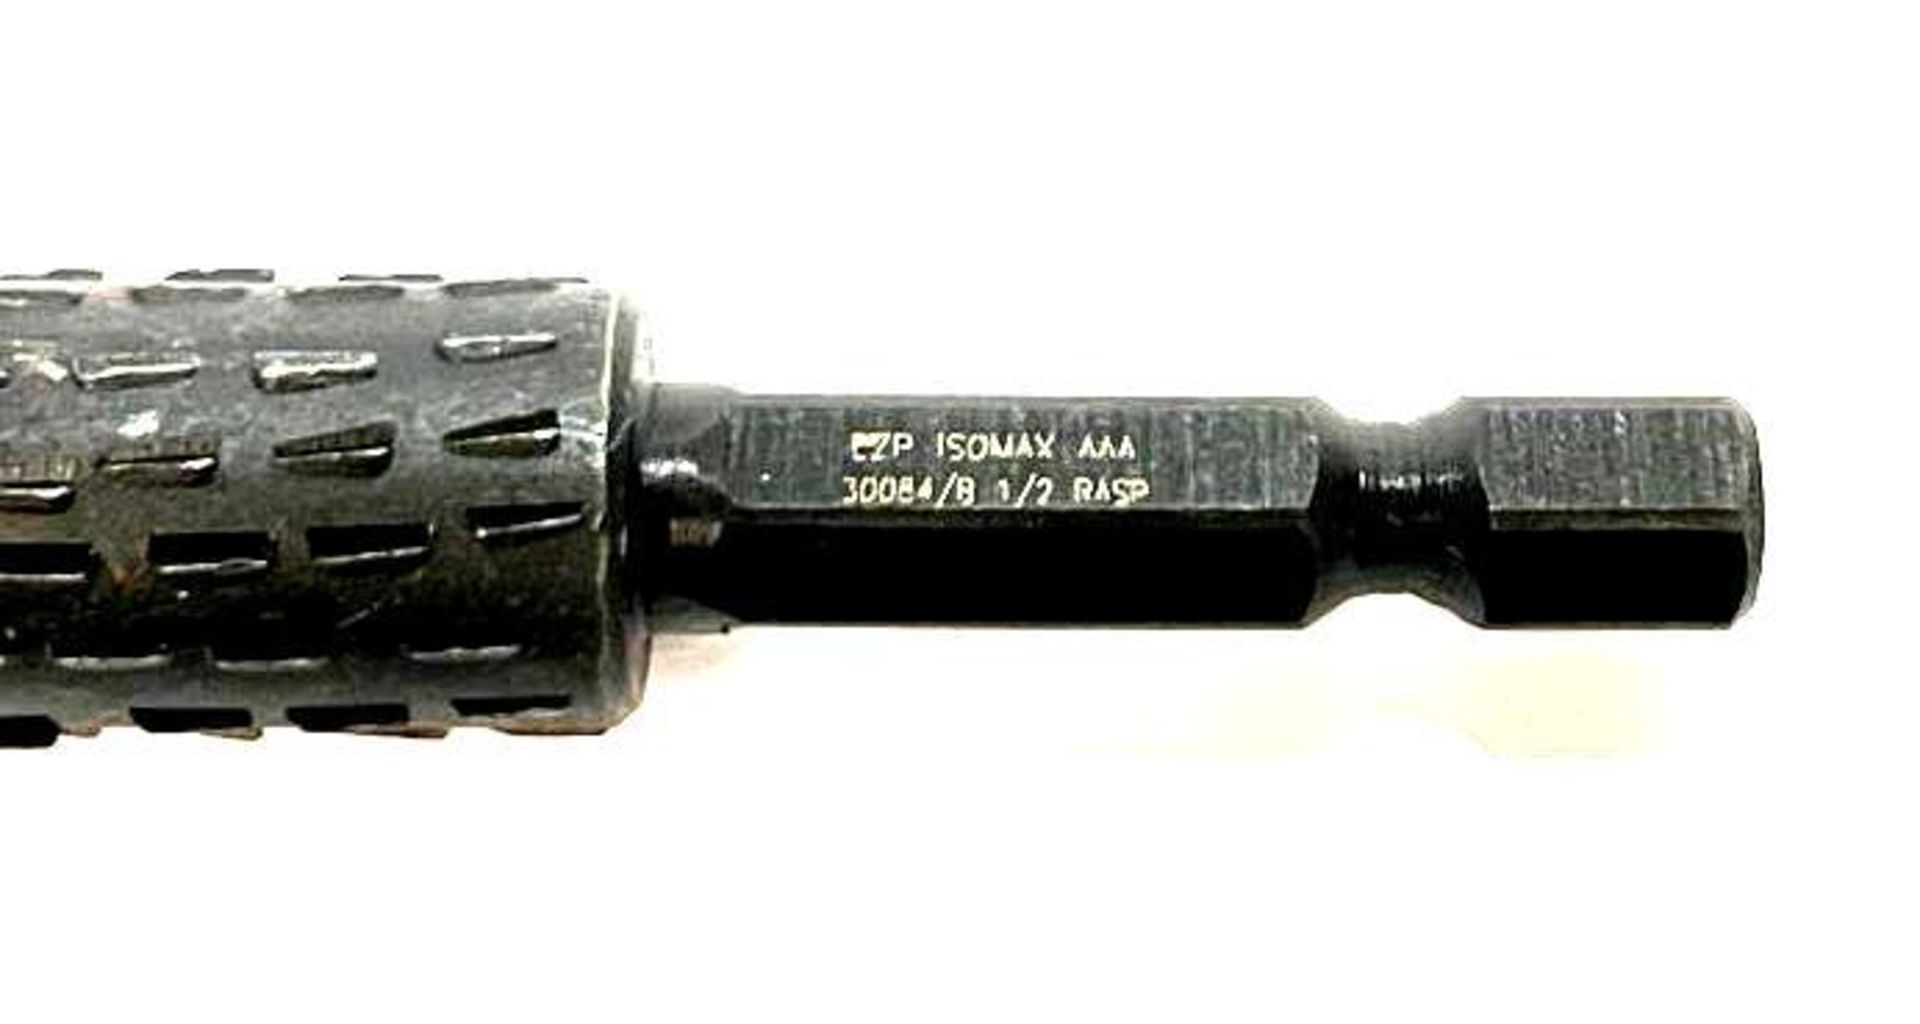 (1,000) 5/8" ROUND END CYLINDER ROTARY RASP (CARDED) BRAND/MODEL: EAZYPOWER 80034 INFORMATION: (2) 5 - Image 2 of 4